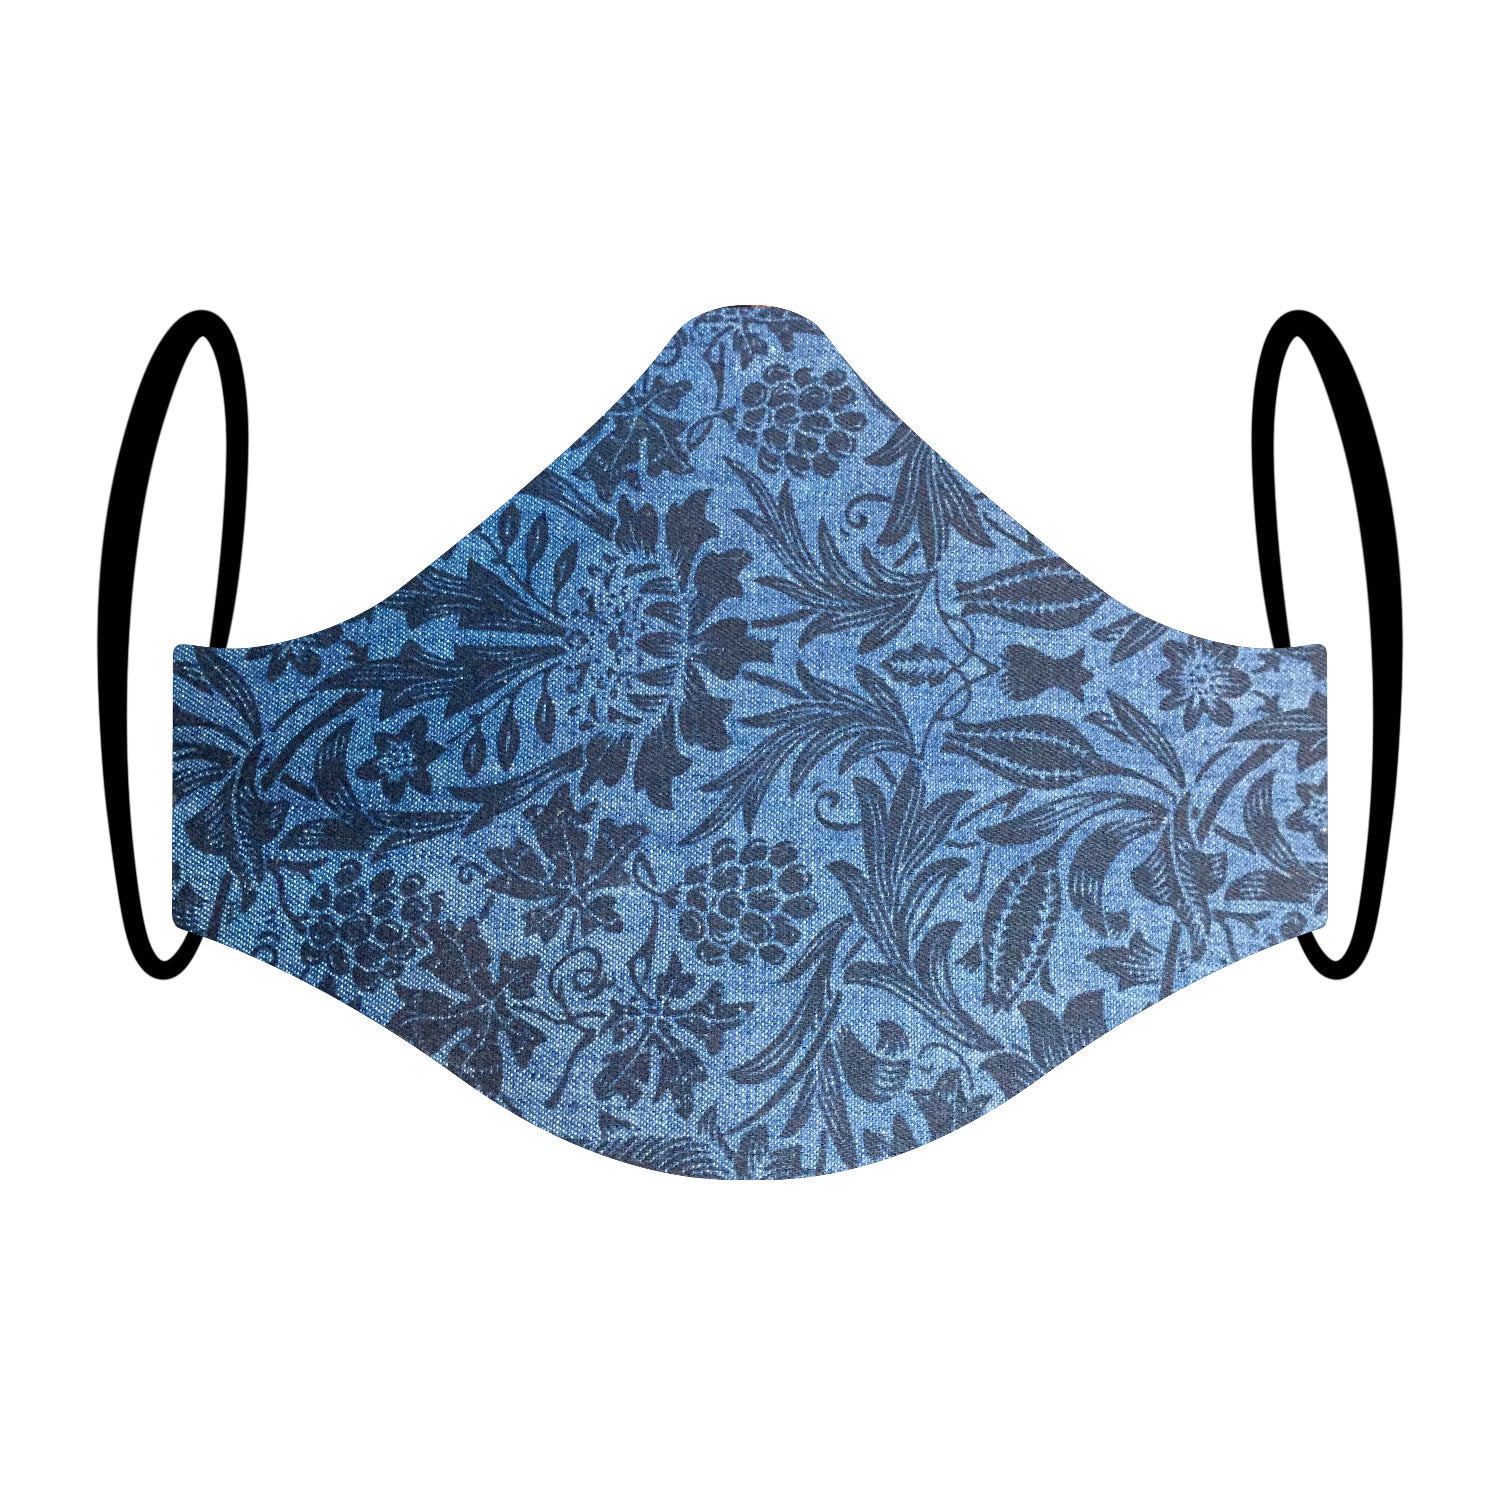 "Deluxe Denim" Print Triple-layer Washable Face Mask